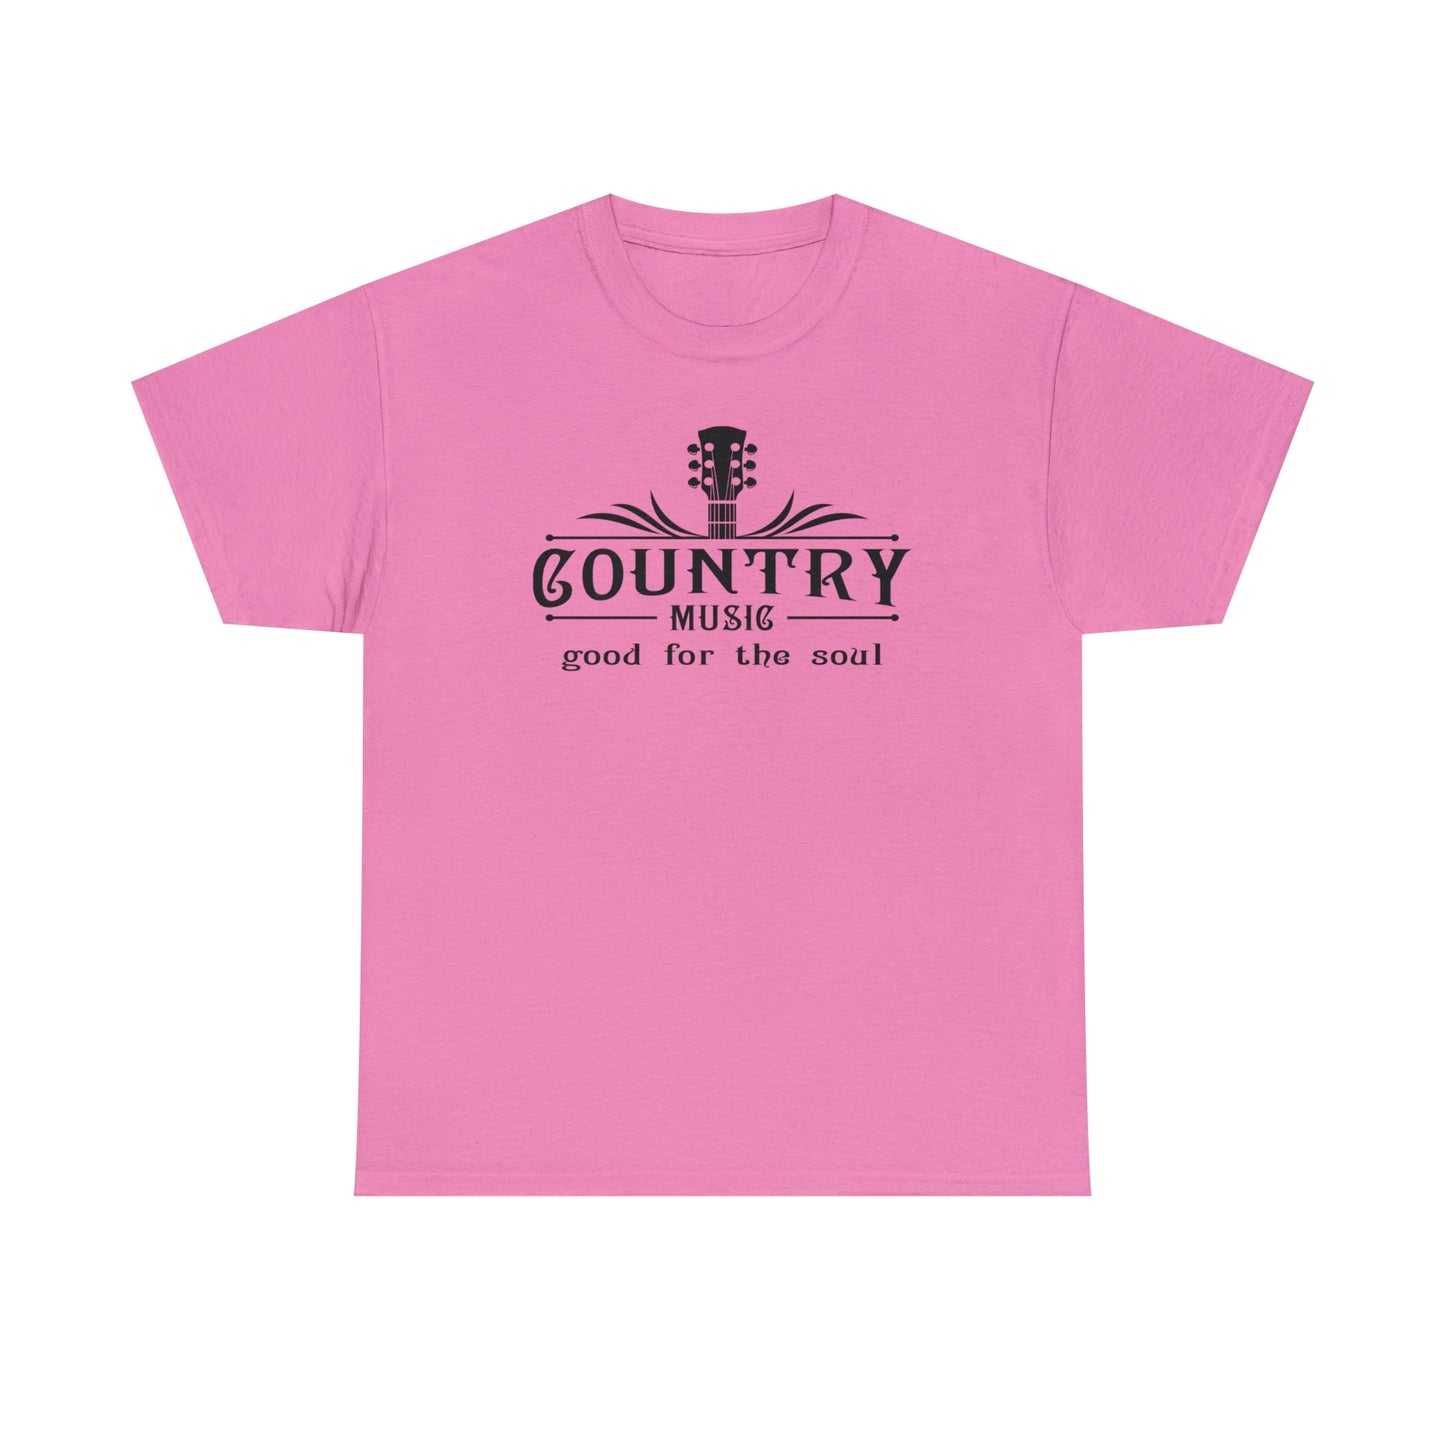 Country Music T-Shirt Western T Shirt For Cowboy TShirt For Boot Scootin' Shirt For Country Shirt For Country Music Gift